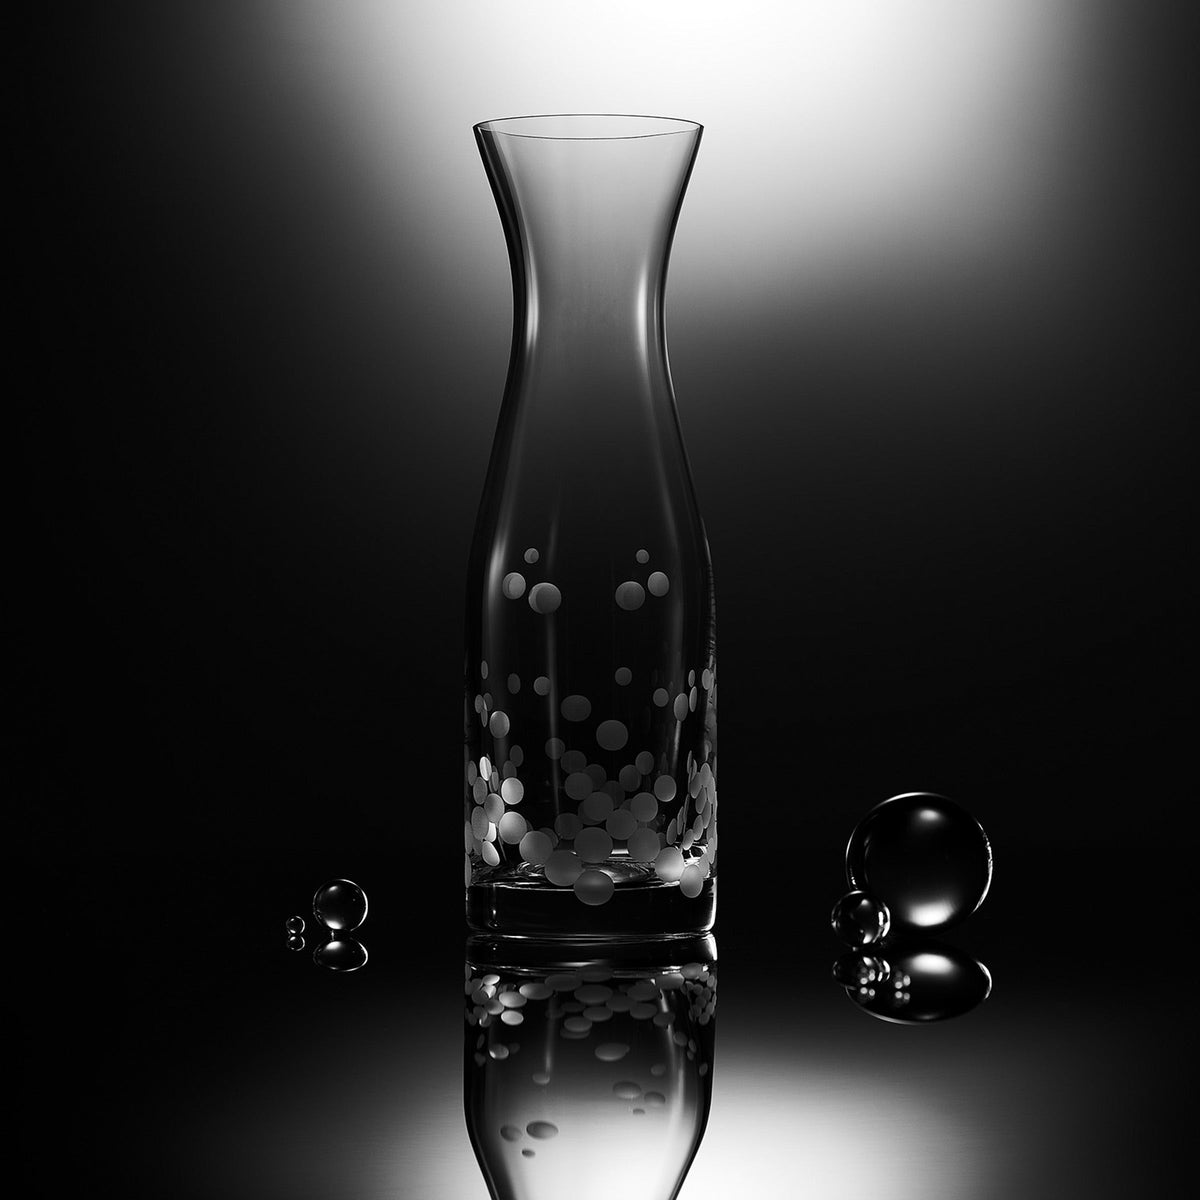 Description: A Caskata Chatham Pop Carafe glass vase with a polka-dot pattern and bubbles in it.